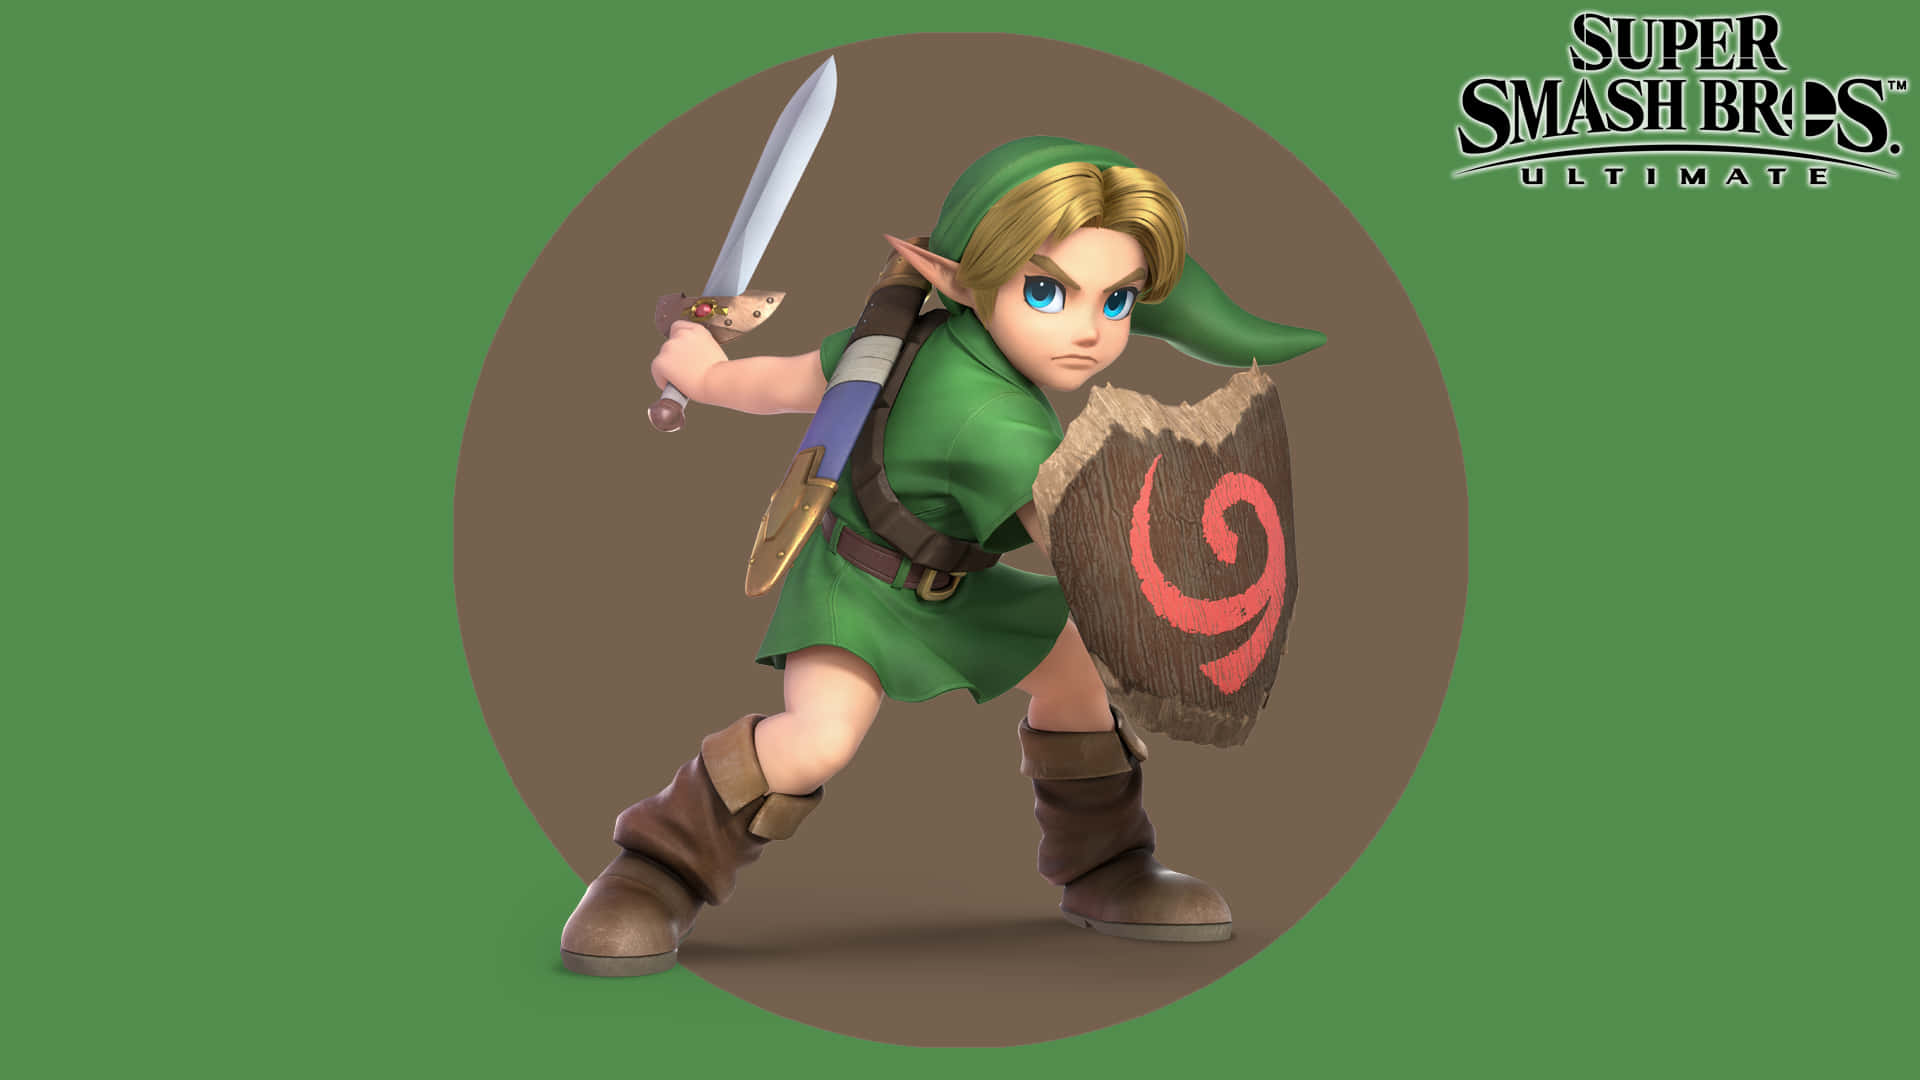 Toon Link Playable In Super Smash Bros Ultimate Background